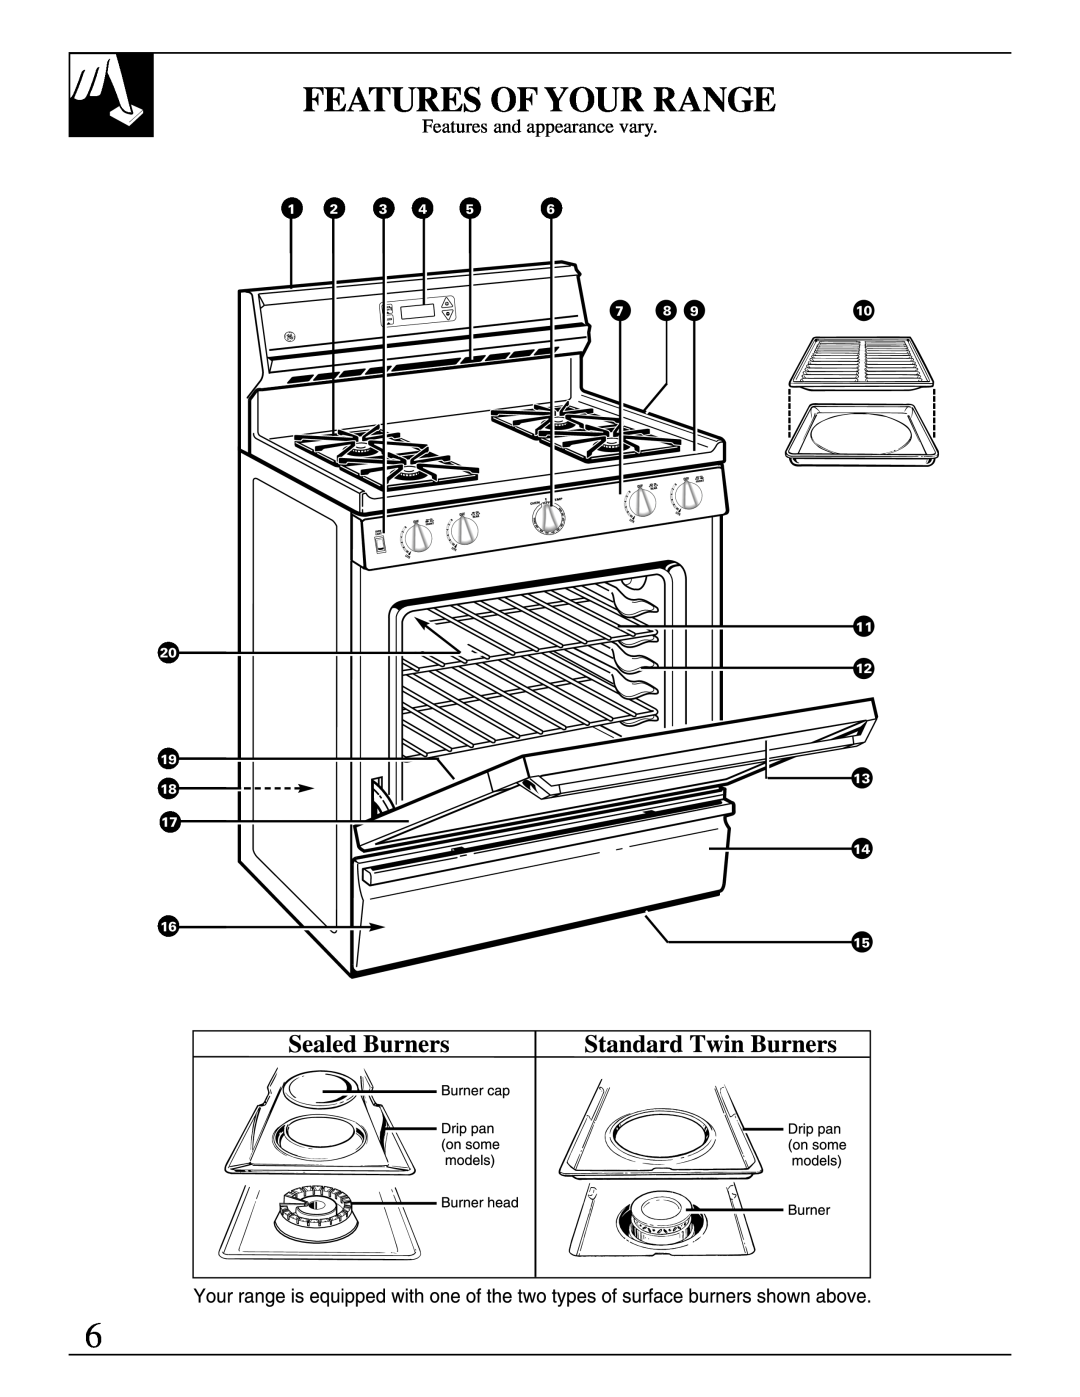 GE XL44 manual Features Of Your Range, Features and appearance vary, Mask For Shelves 